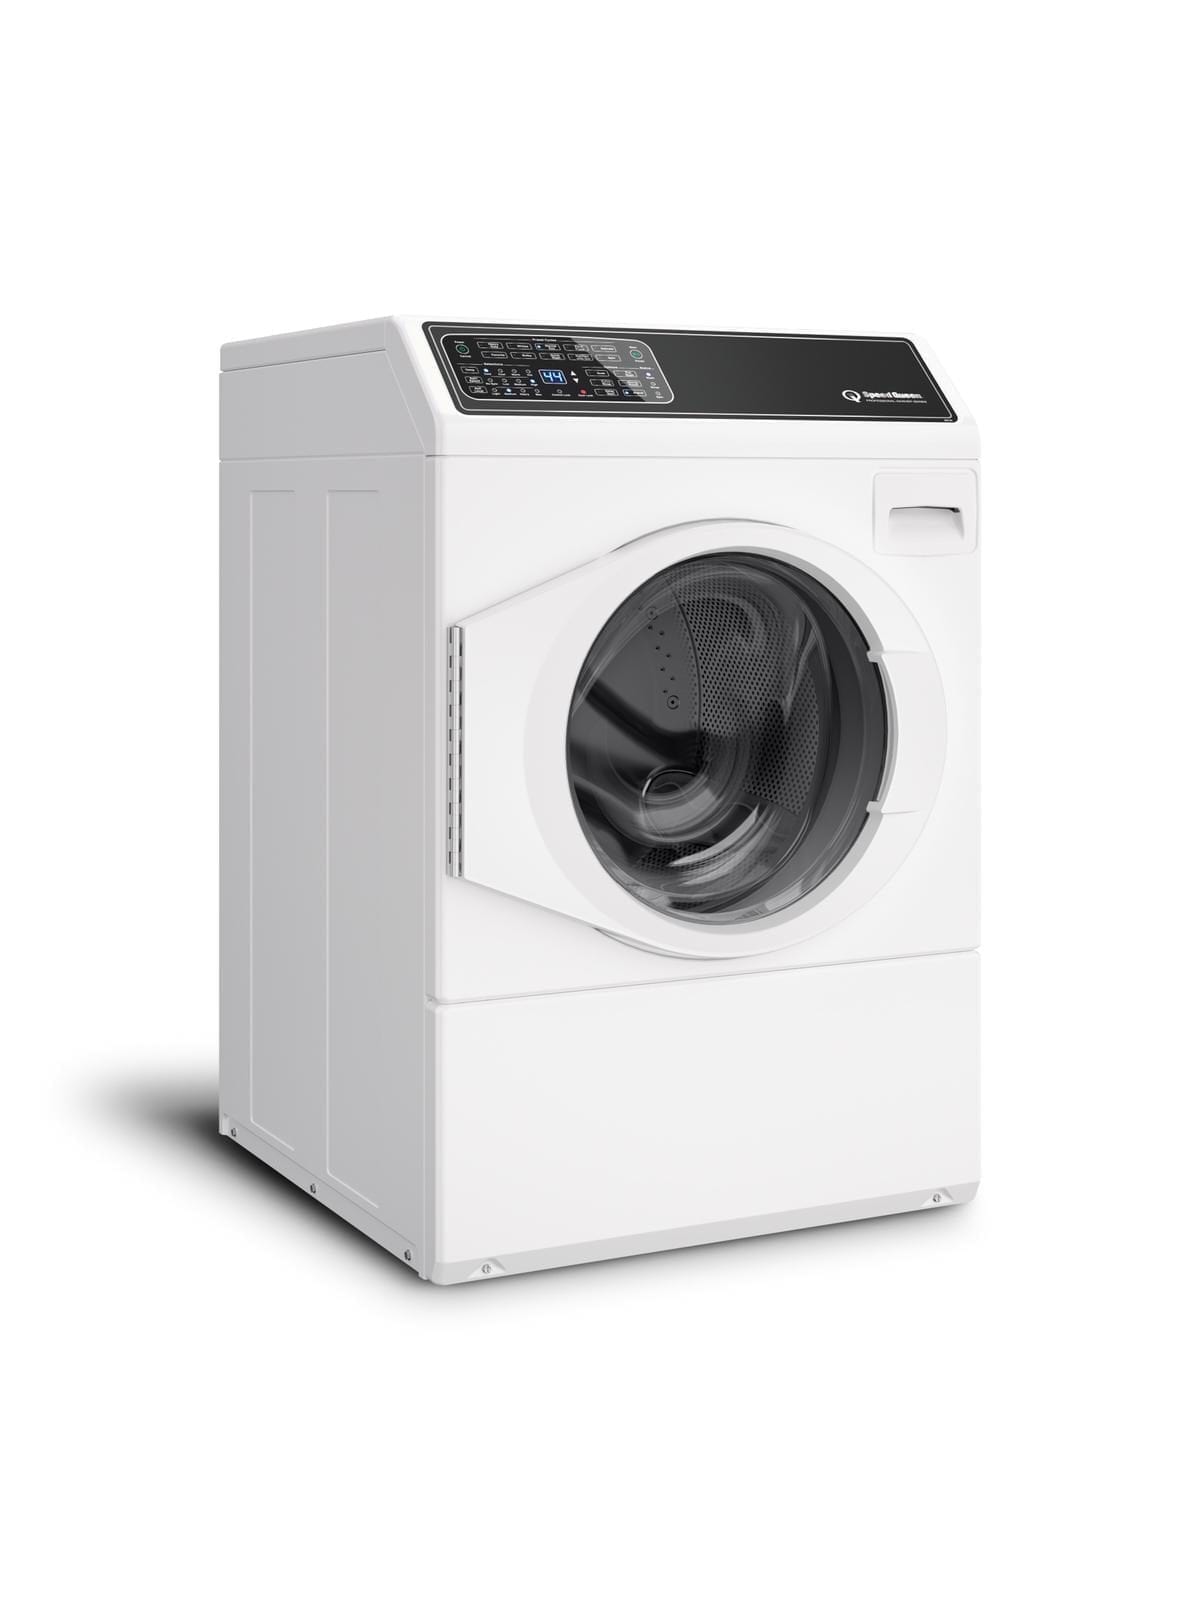 speed-queen-washers-at-best-buy-cheapest-wholesale-save-40-jlcatj